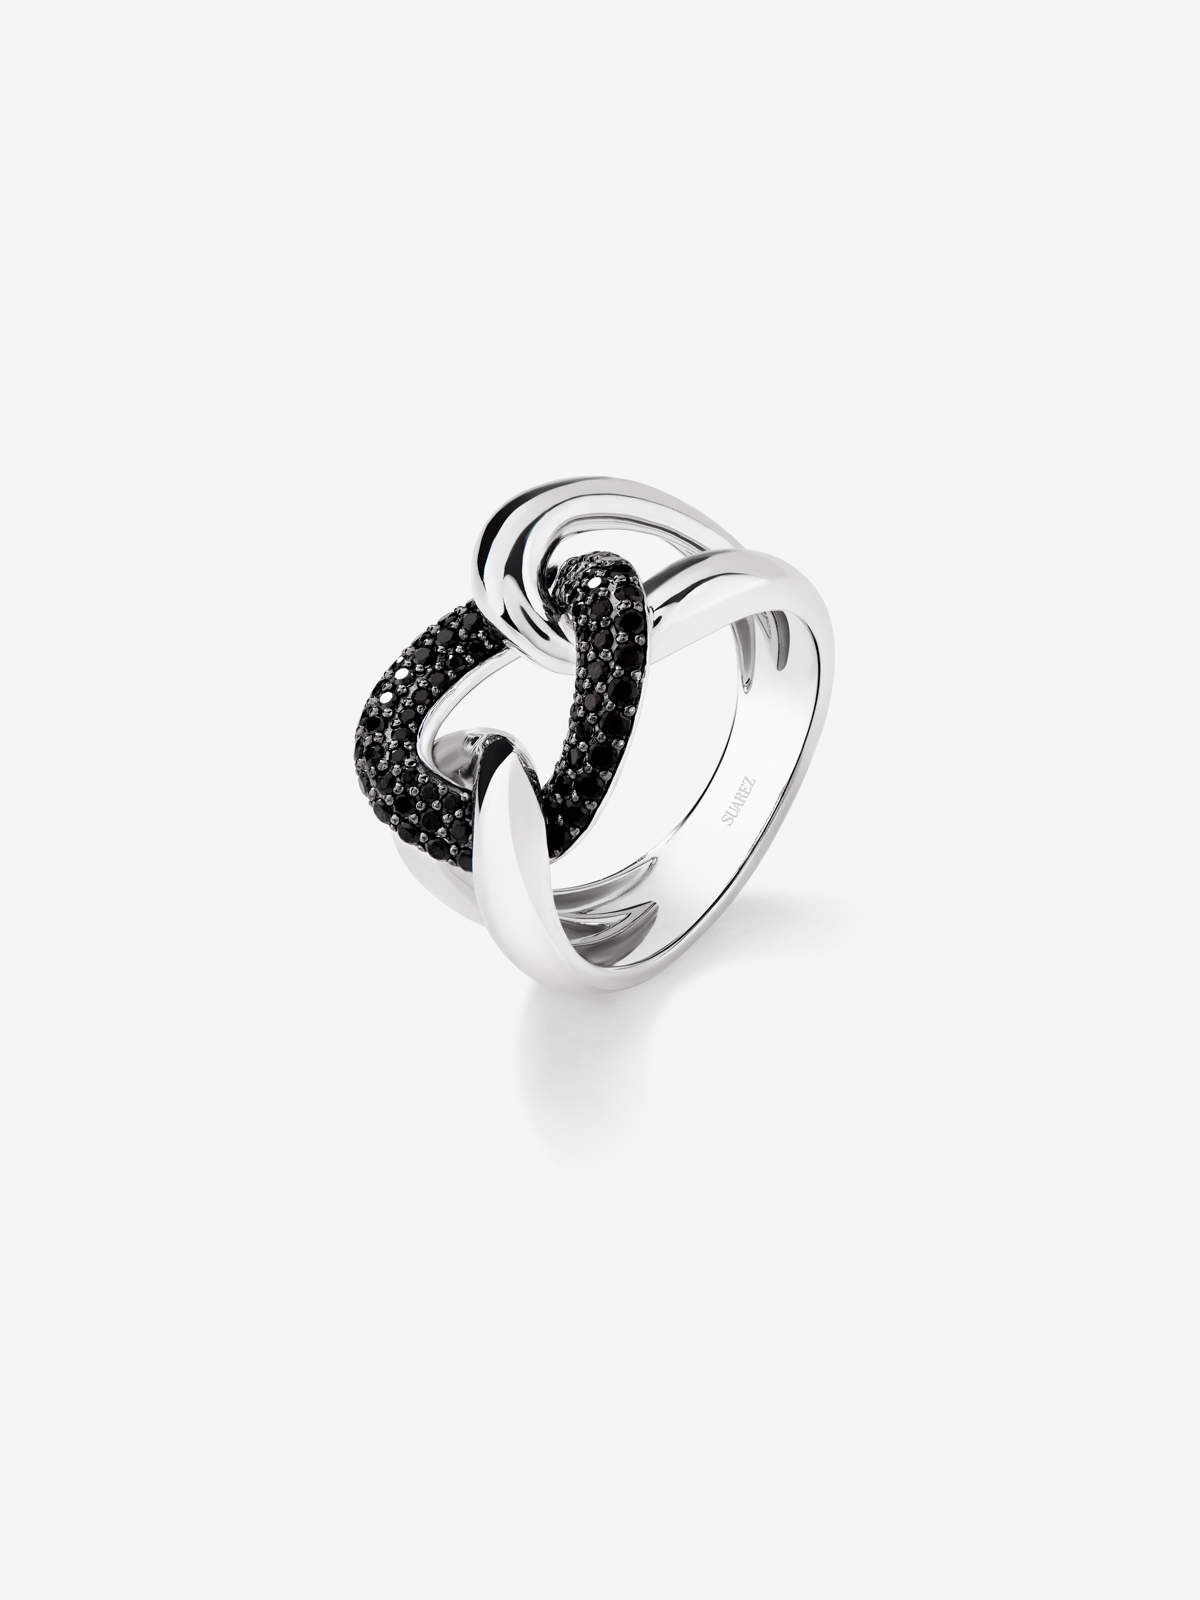 Ring with 925 silver knot with spinels